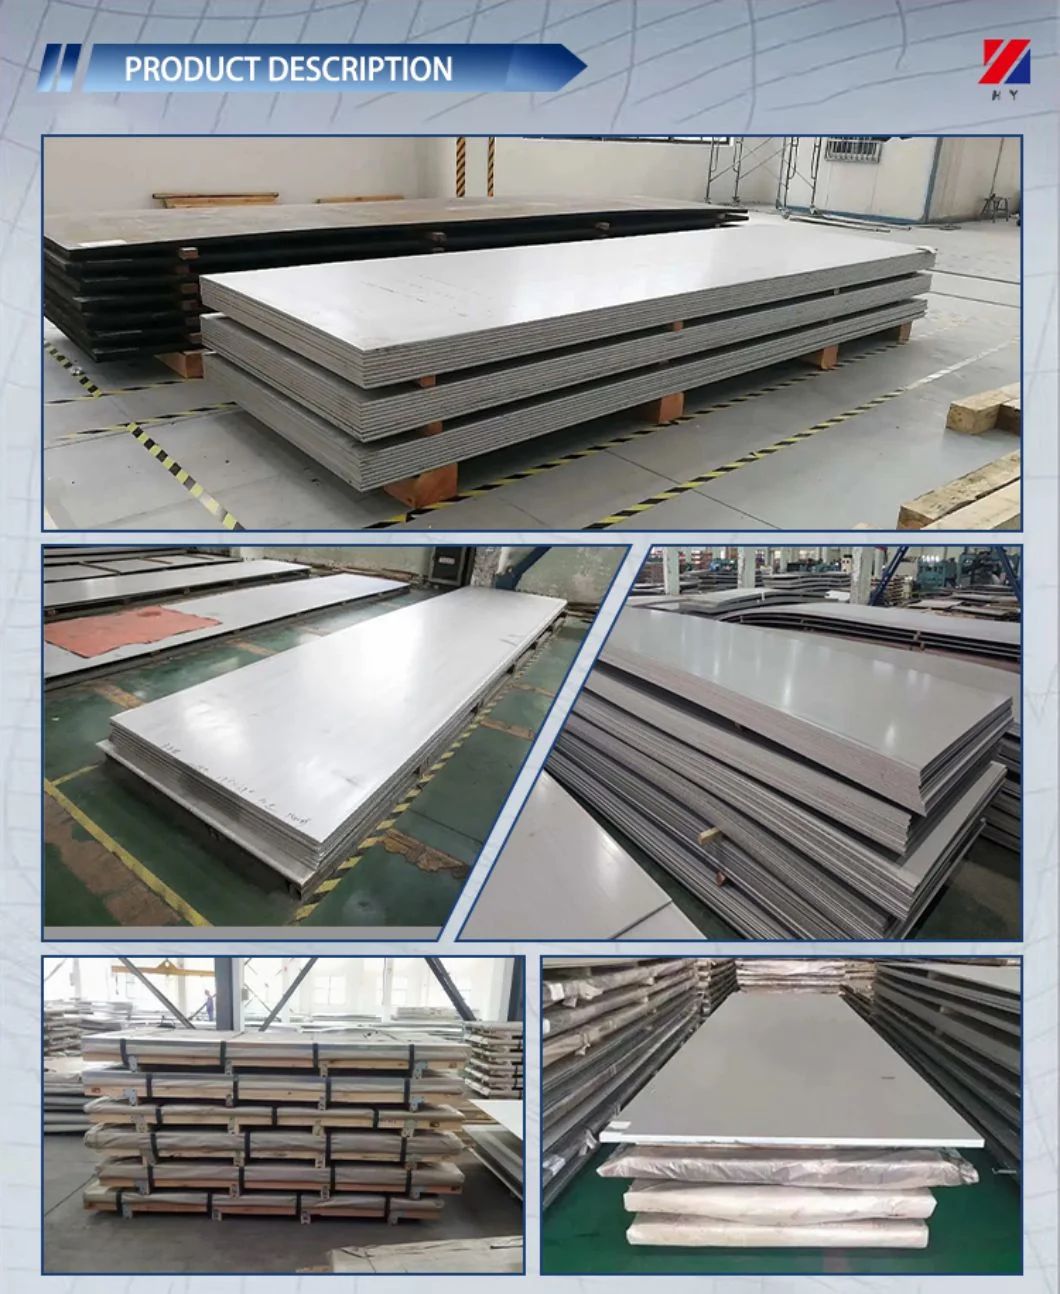 Inconel 600 601 625 718 750 X-750 N07750 4X8 Feet Stainless Steel Sheet/Plate Price Per Kg Inconel Alloy Sheet